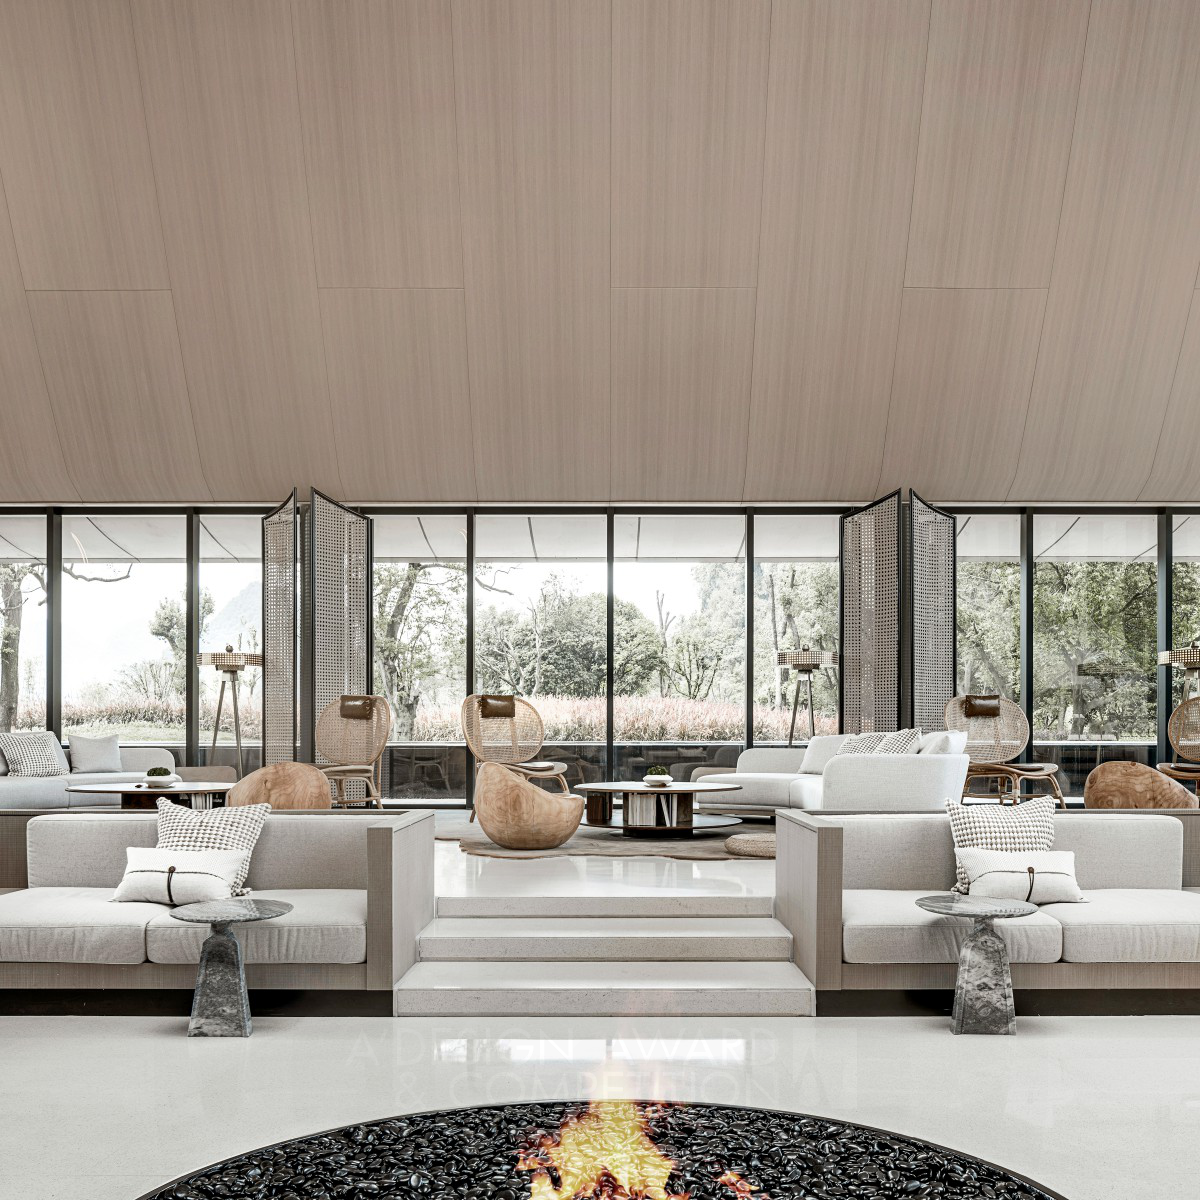 Fireplace Valley Sales Center by Jing Zhou Golden Interior Space and Exhibition Design Award Winner 2021 